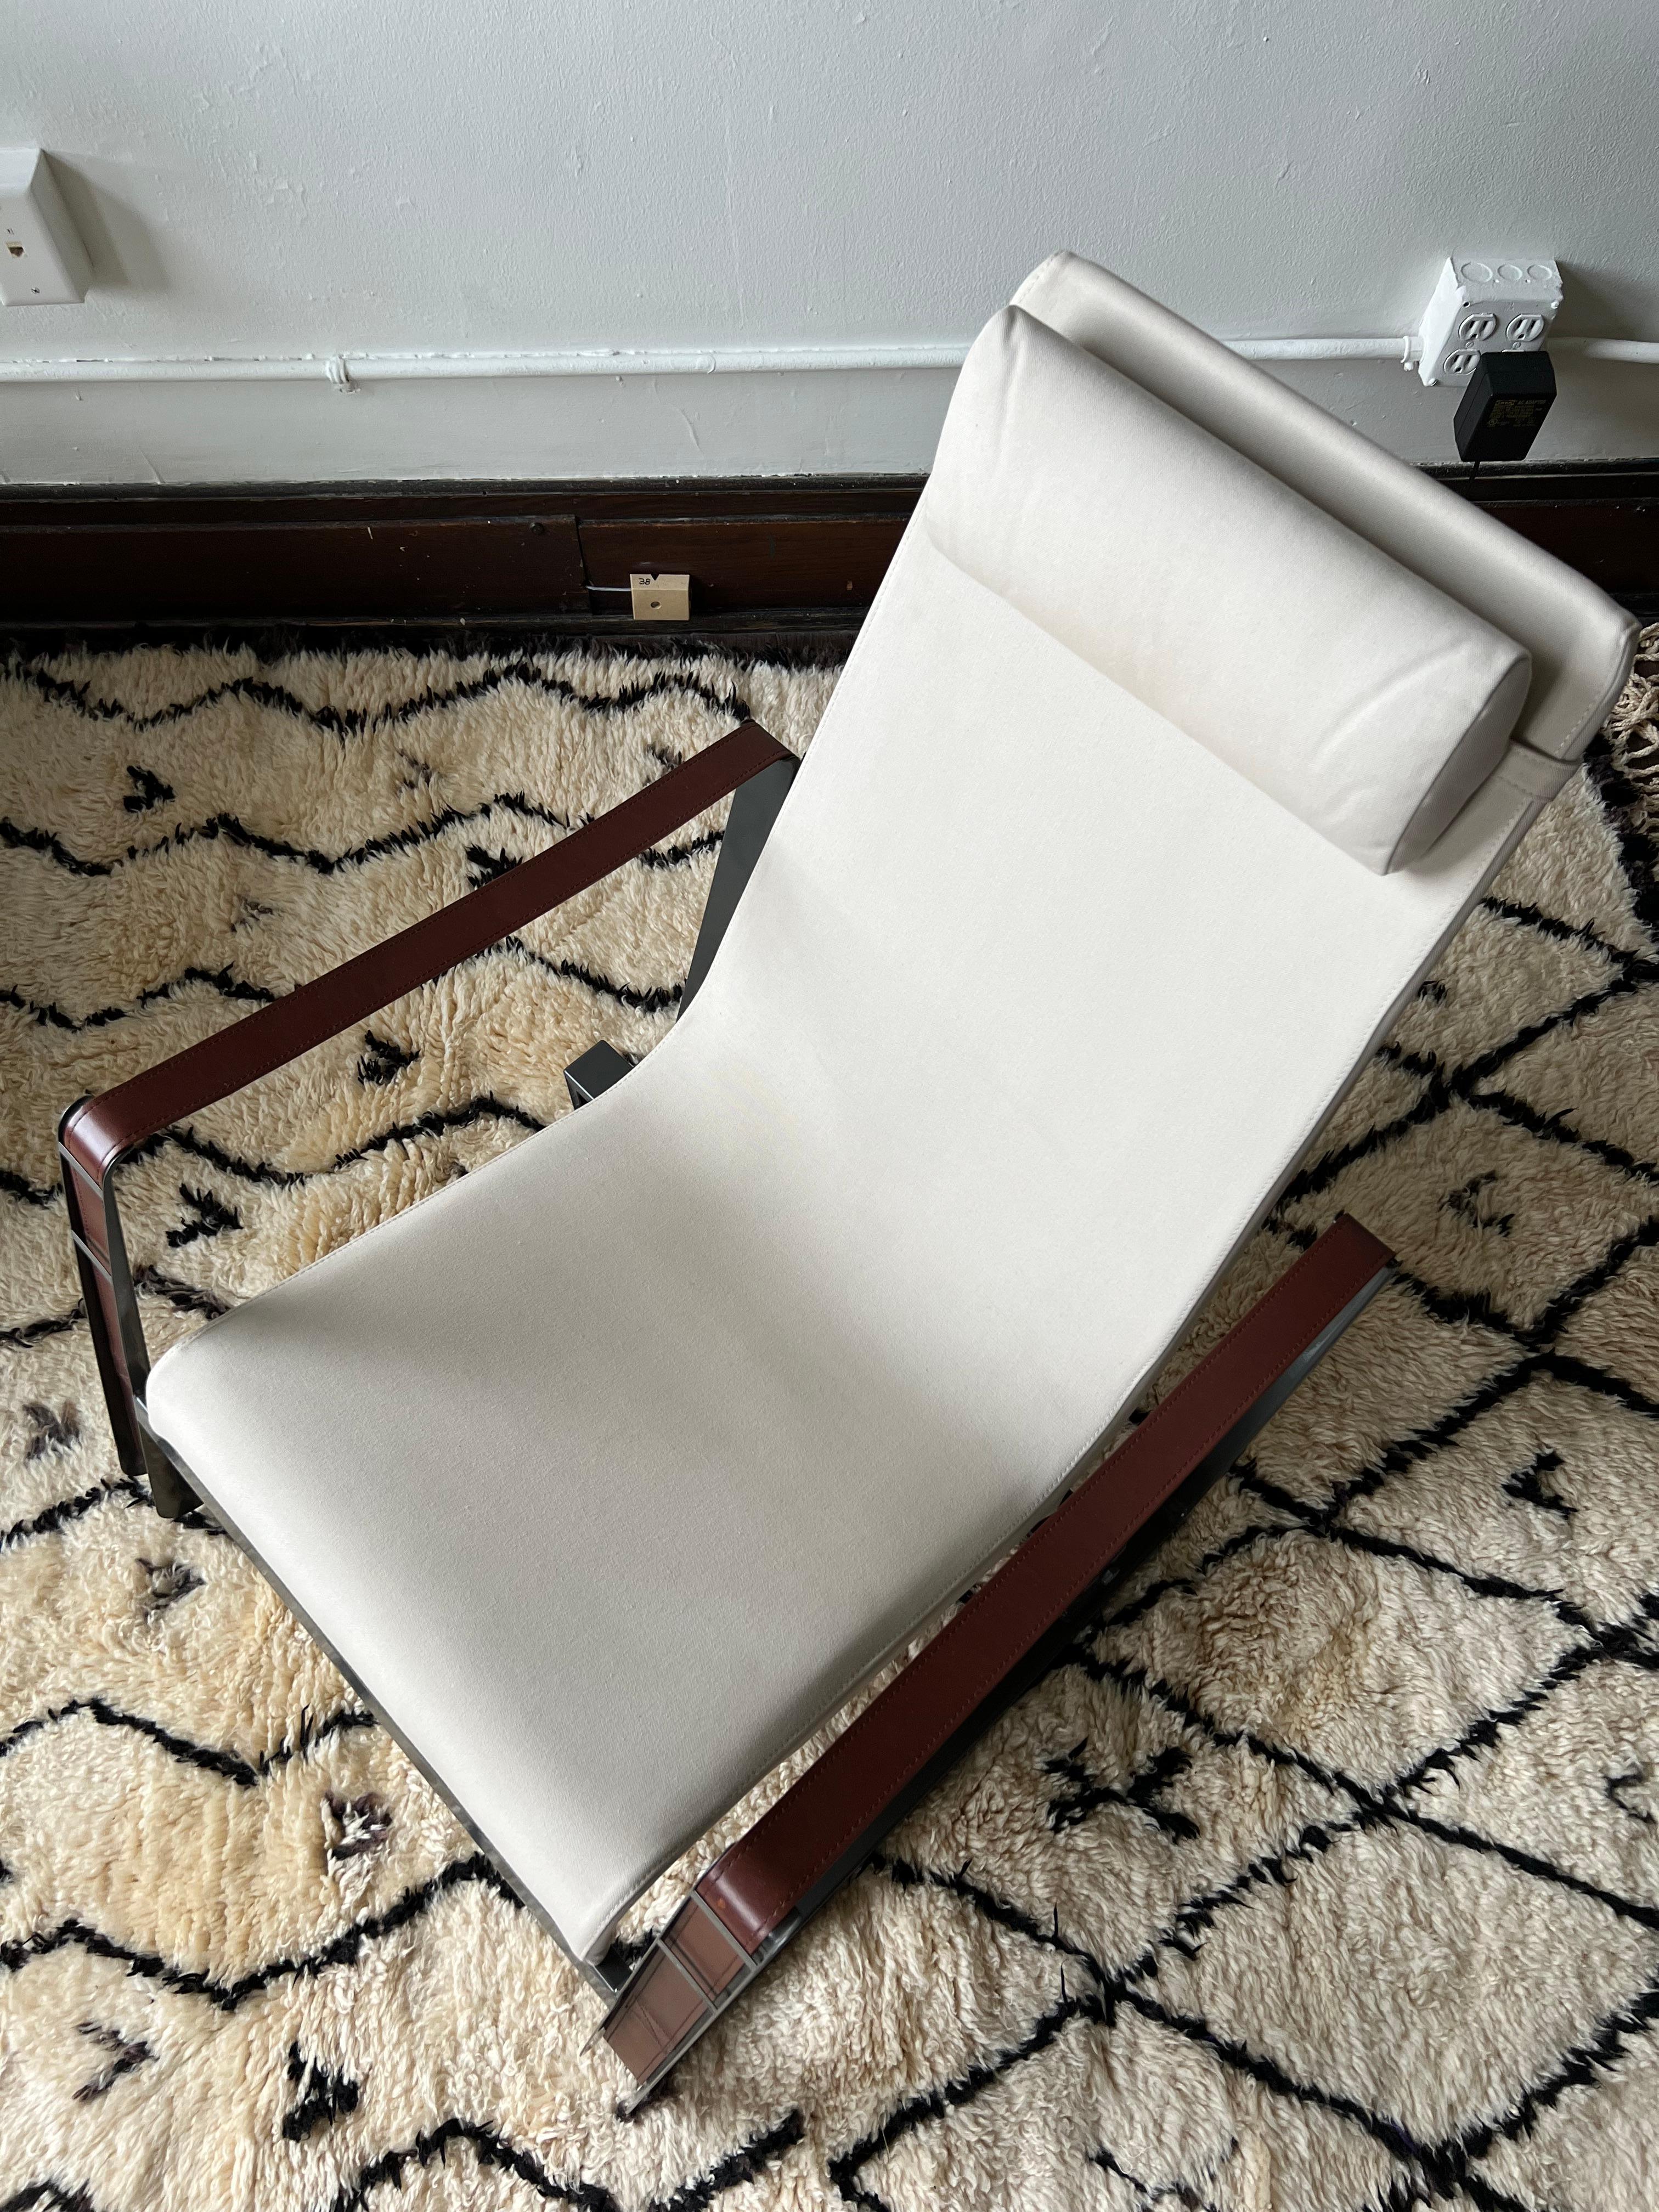 European Jean Prouvé Cite Lounge Chair (Prouvé RAW Edition) by G Star Raw and Vitra